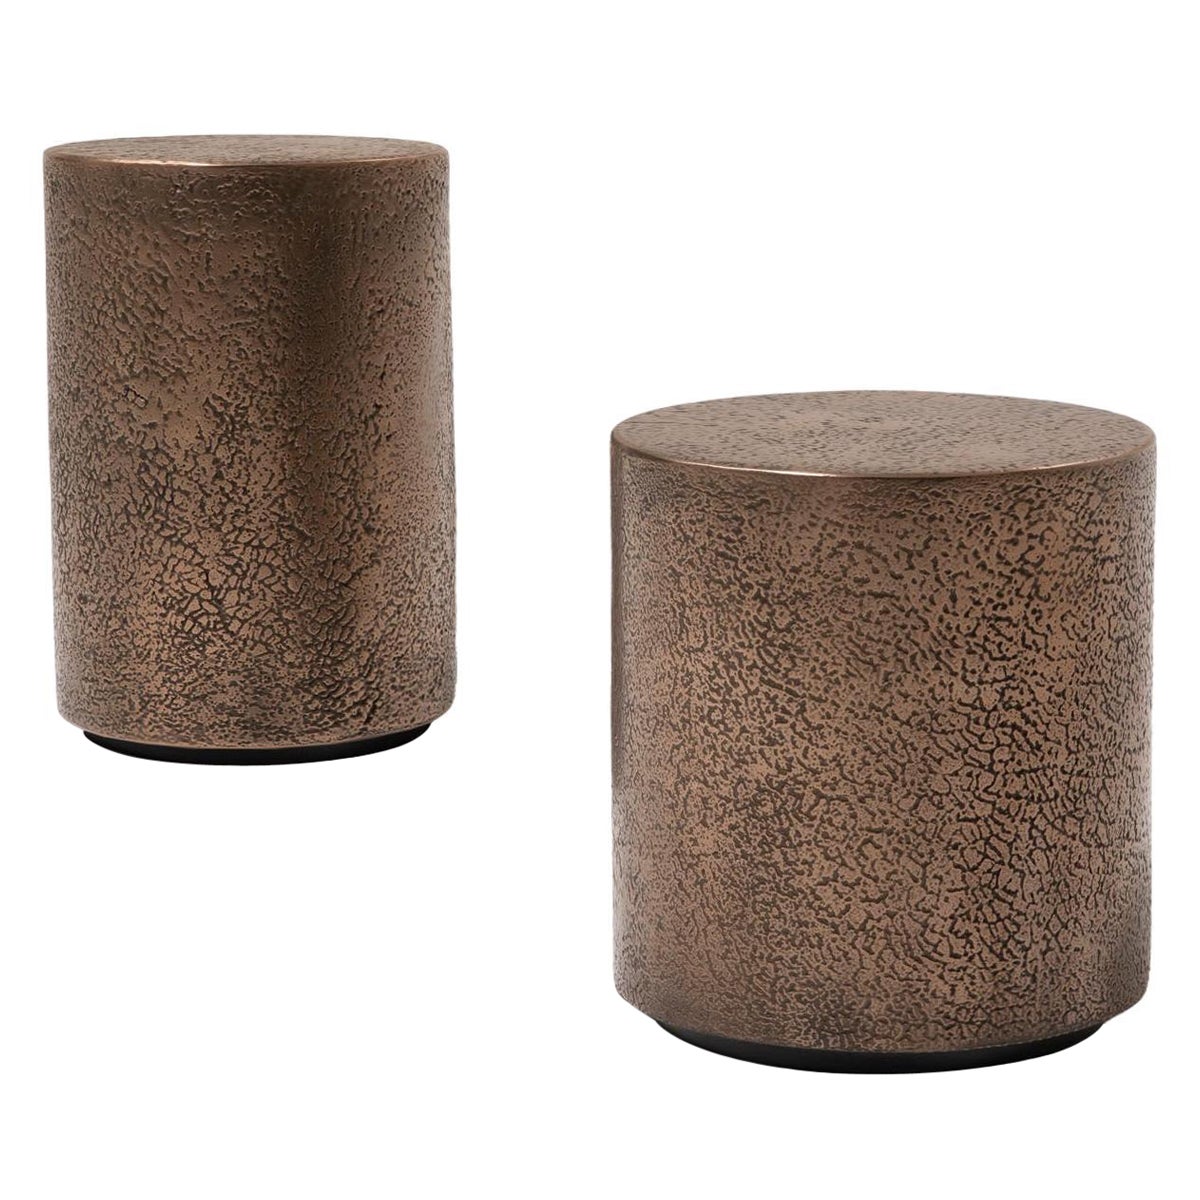 Coral, Bronze liquid metal servo coffee table with embossed surface.